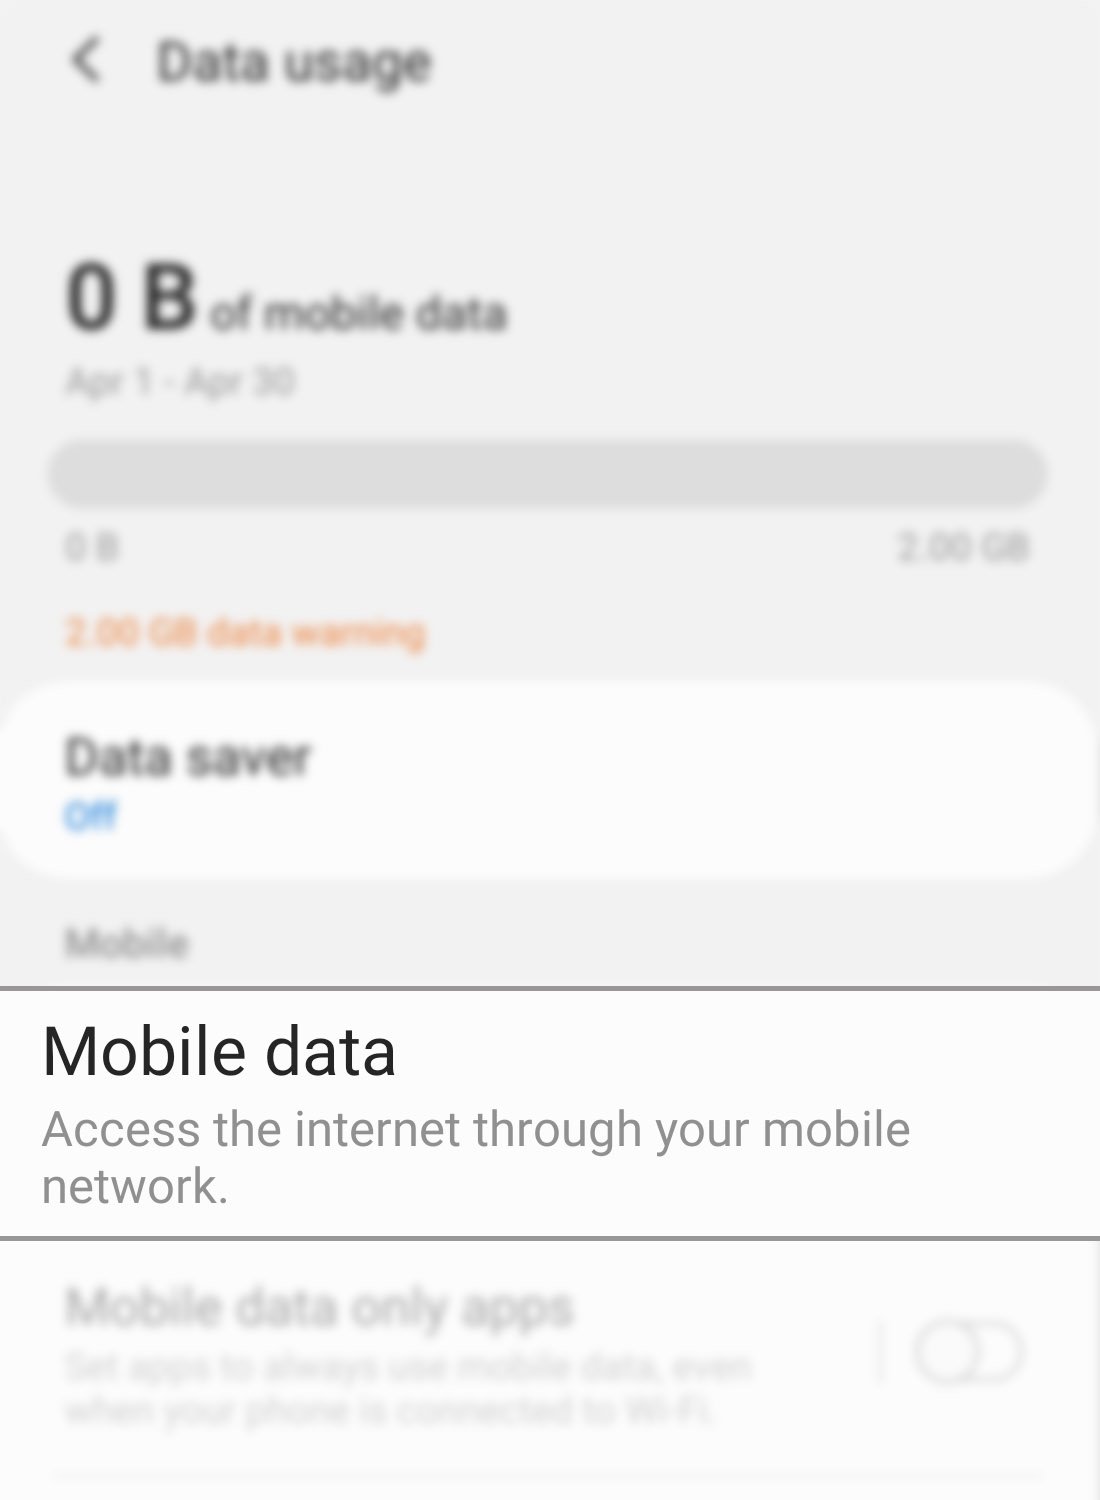 manage data usage galaxy s20 - mobile data